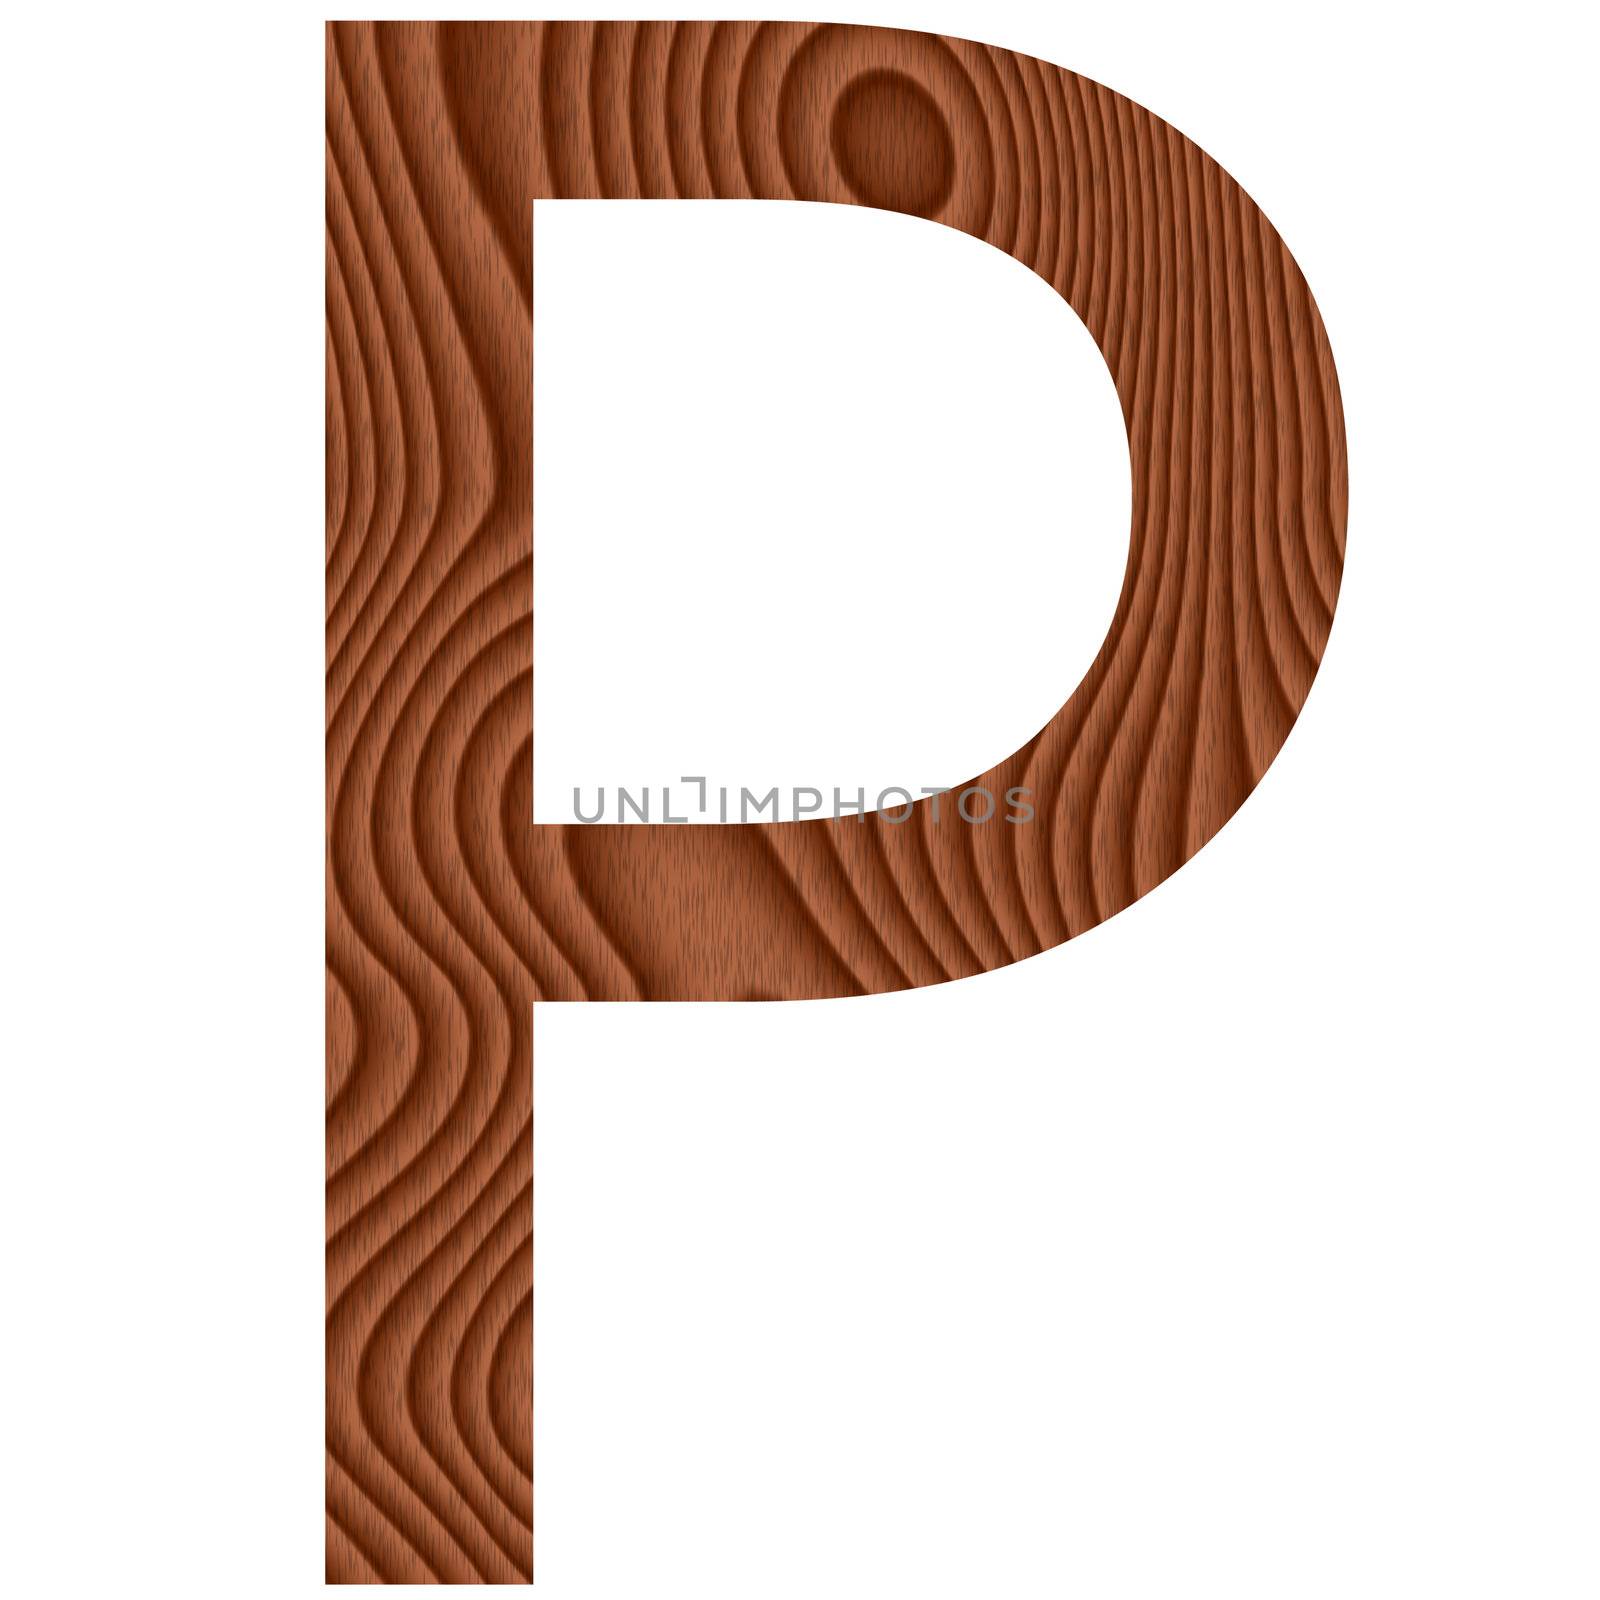 Wooden Letter P isolated in white